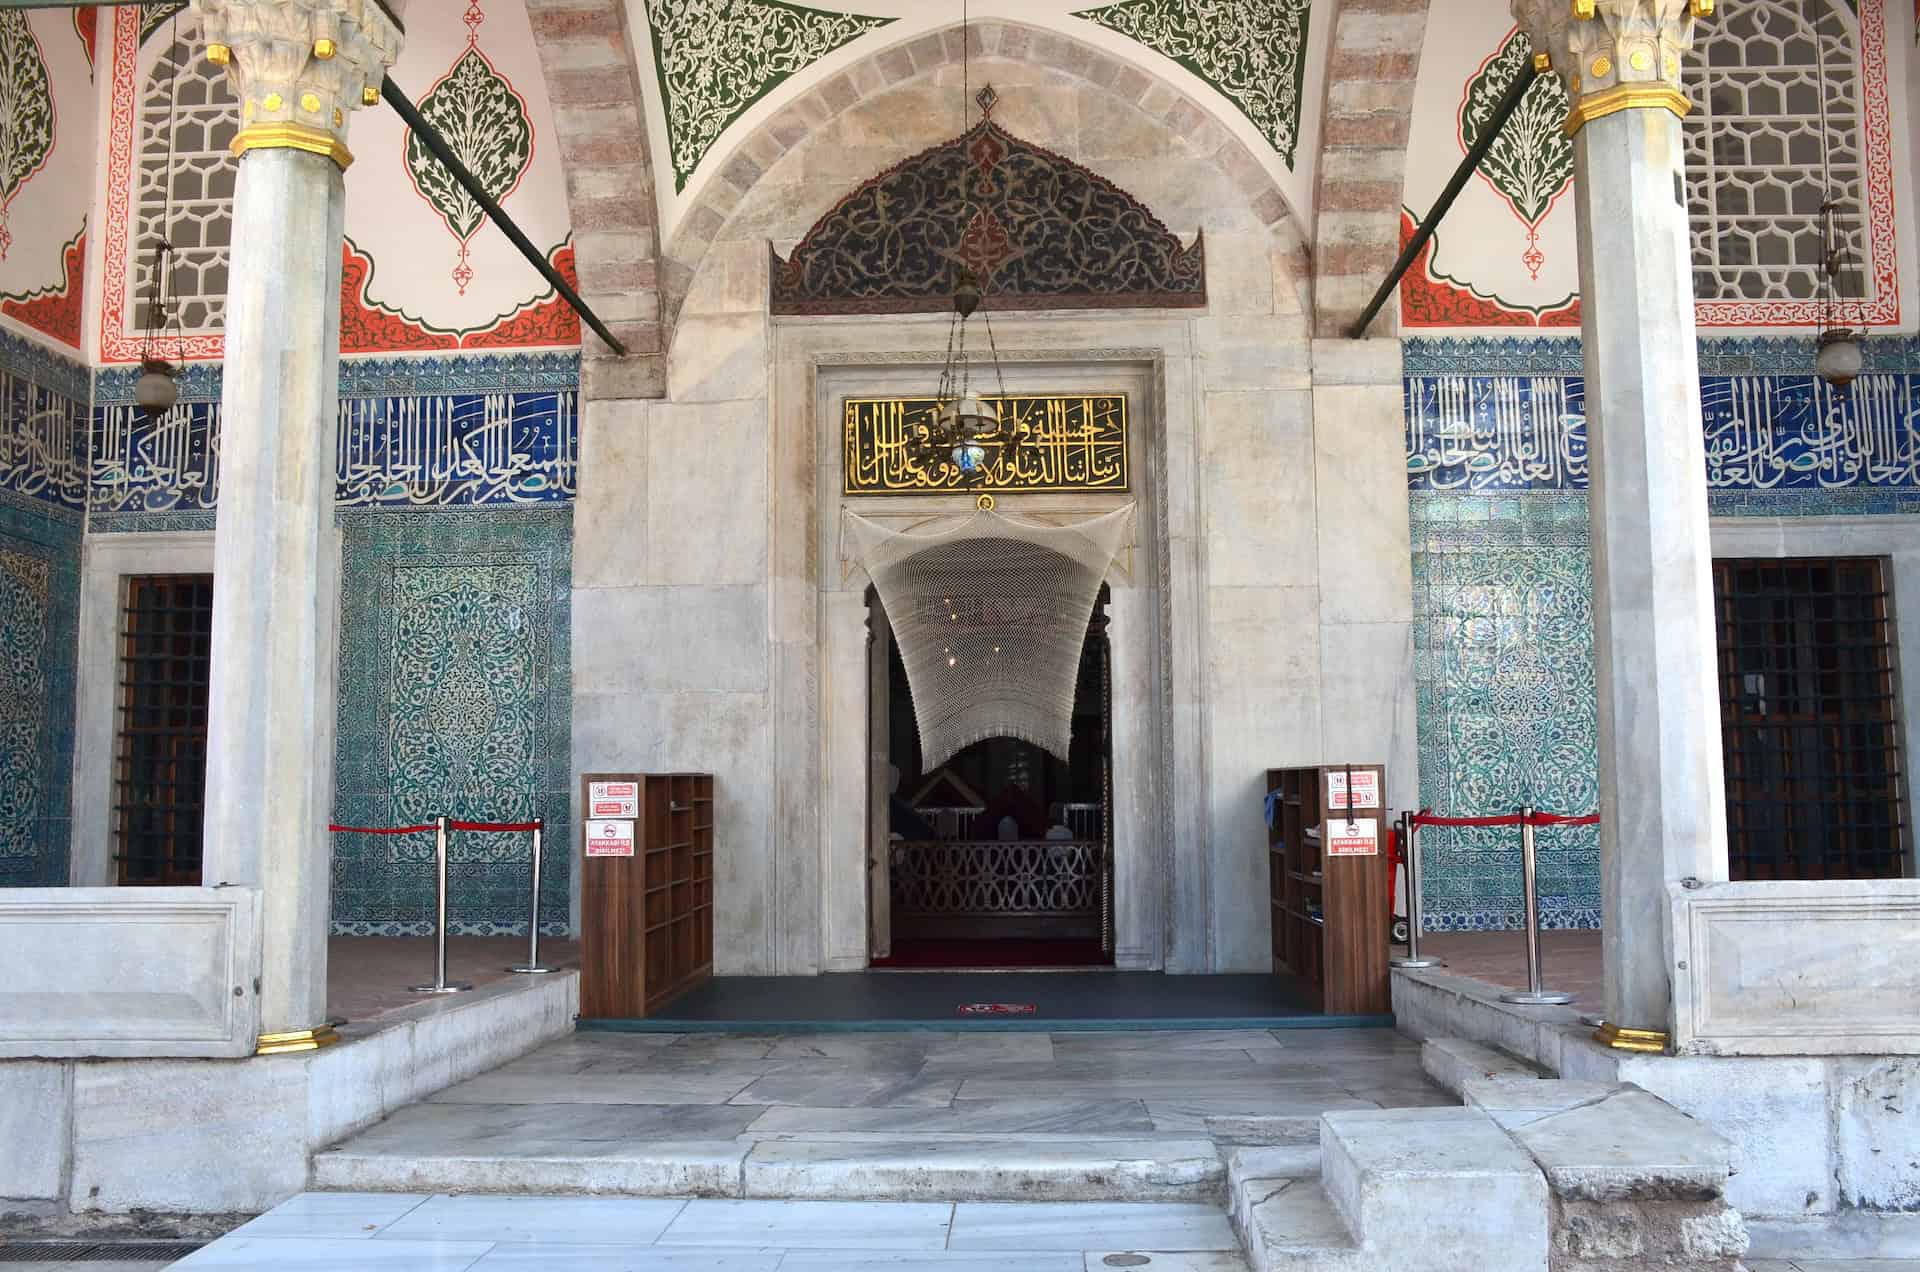 Entrance portal at the Tomb of Turhan Hatice Sultan of the New Mosque complex in Eminönü, Istanbul, Turkey